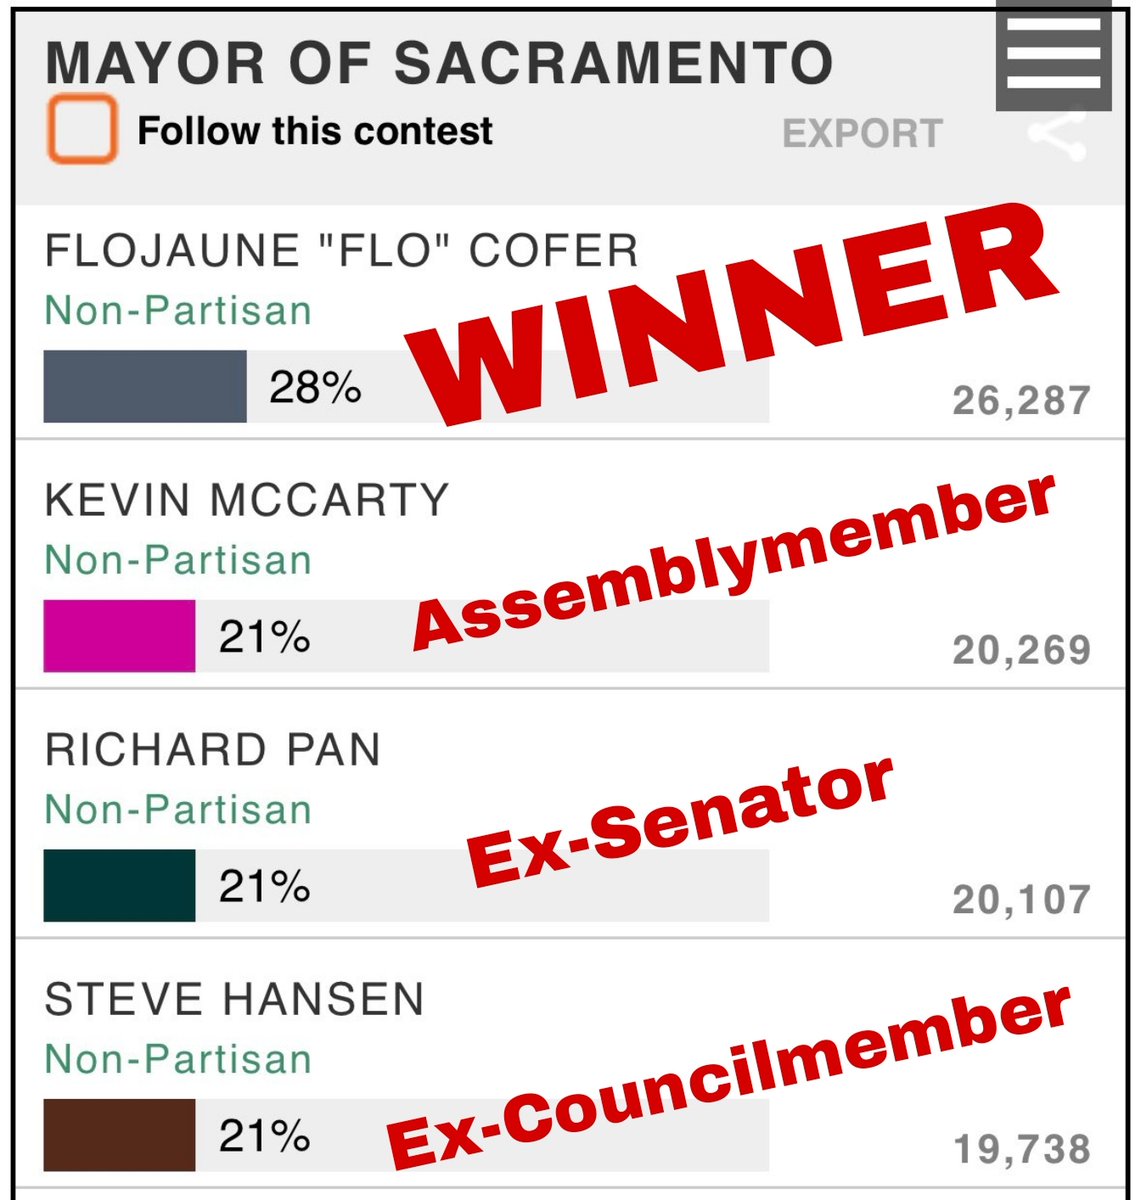 It takes a lot of guts and amazing organizing skills to come out on top against three big names and a ton of money in Sacramento politics. Huge respect to @Flo4Sacramento and her allies that made this happen. Let's do it again in November!